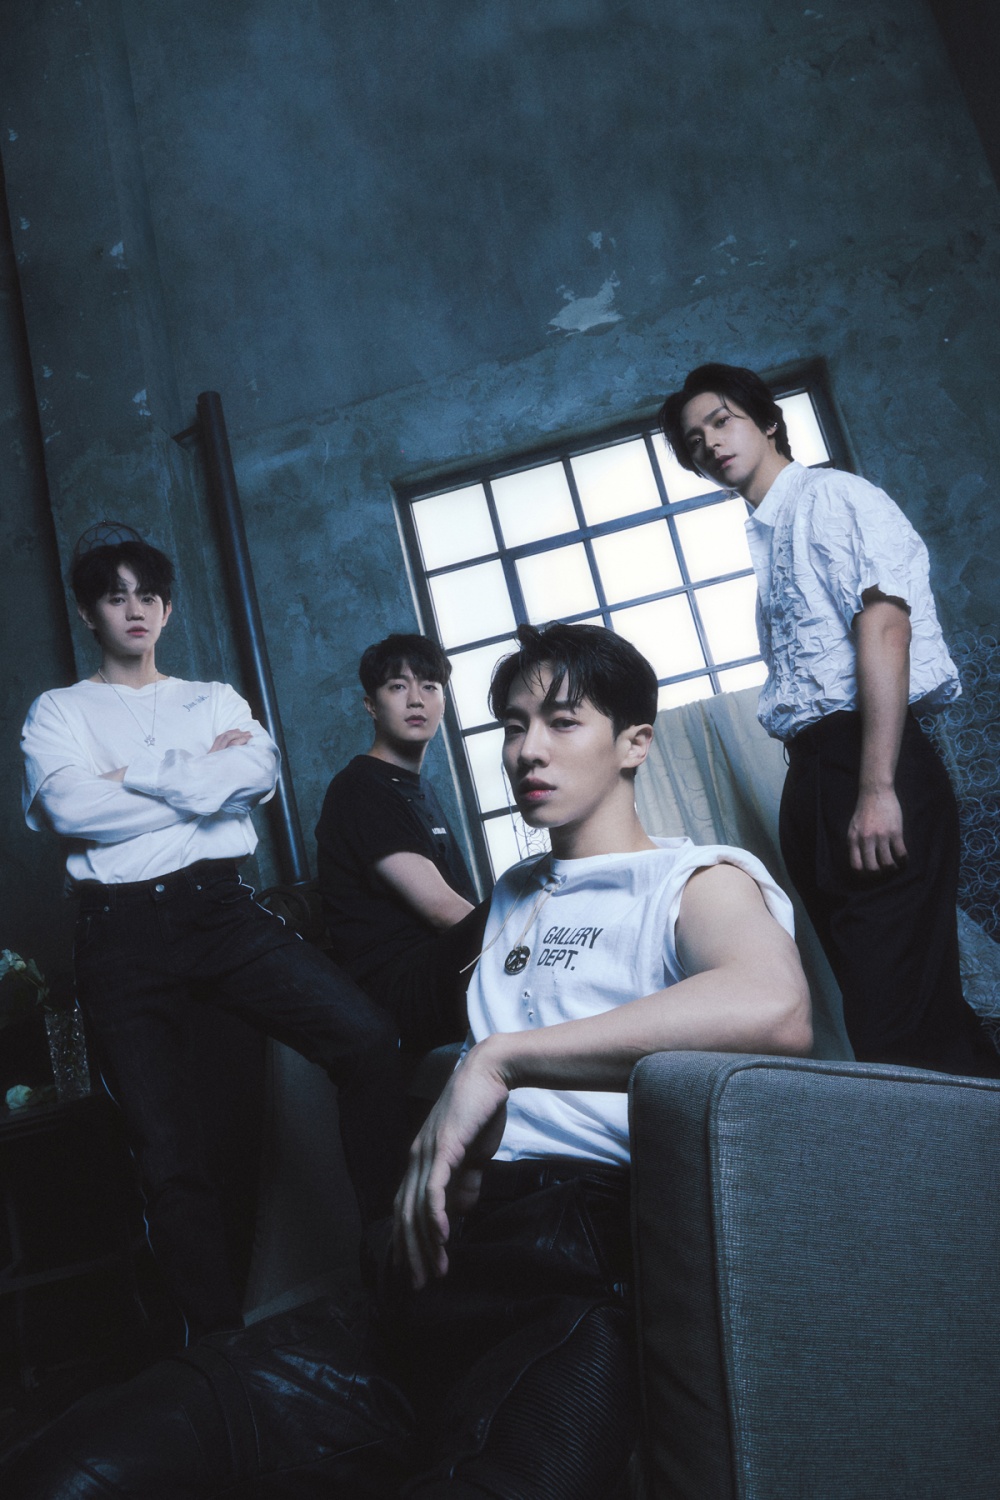 Highlight, transformed into a wounded youth... New album image released